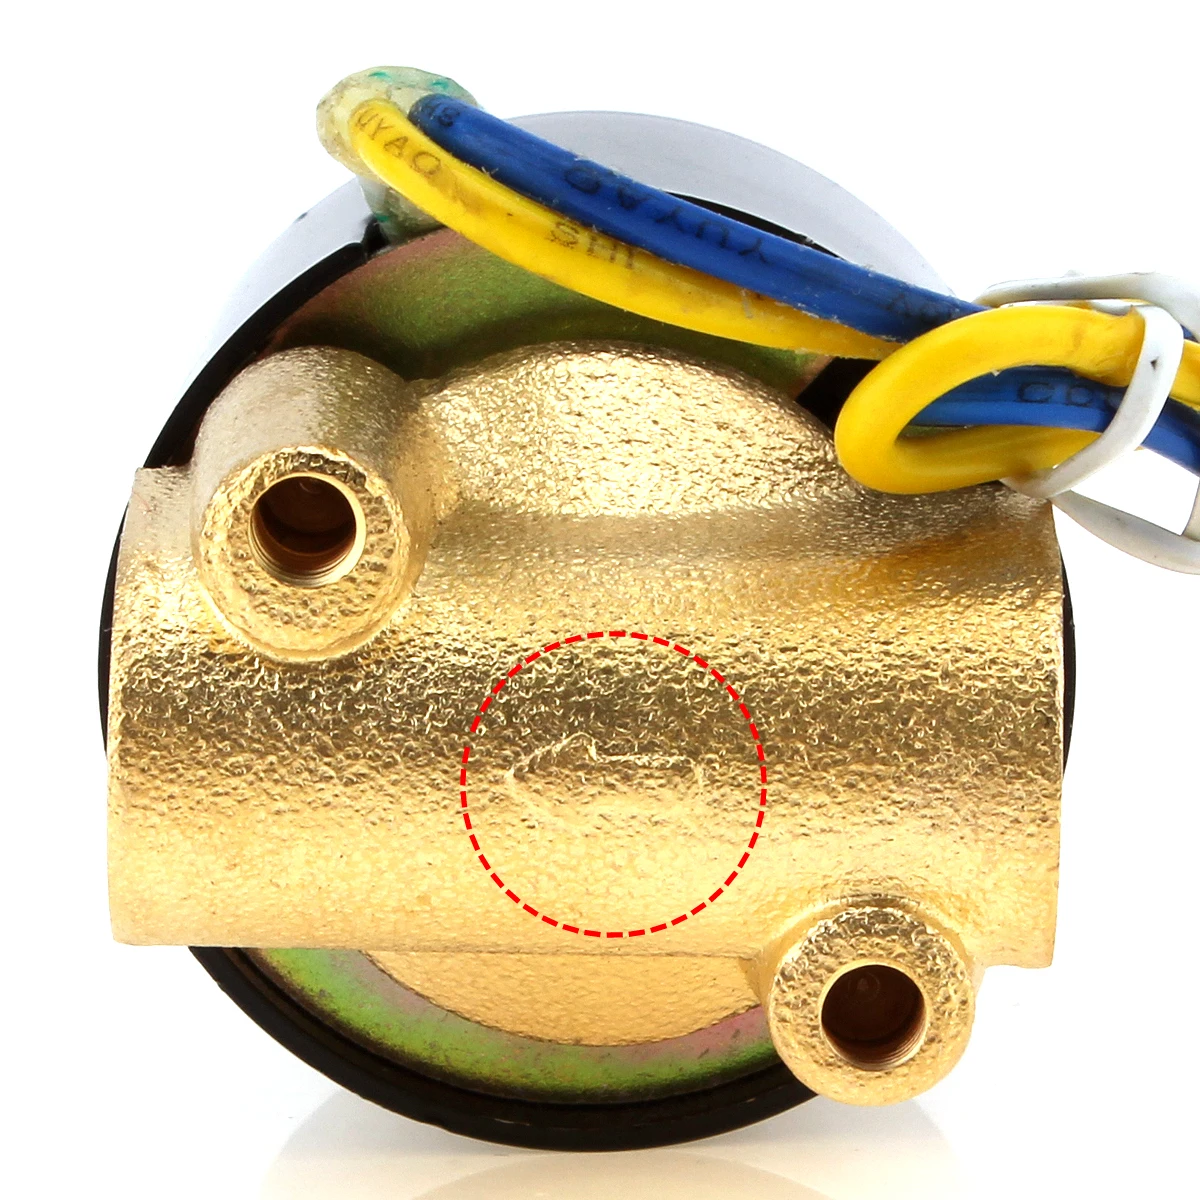 

Solenoid Valve DC 12V 1/4" NPT N/C Brass Normally Closed Electric Valve Electromagnetic Control for Water Oil Air gas Fuels